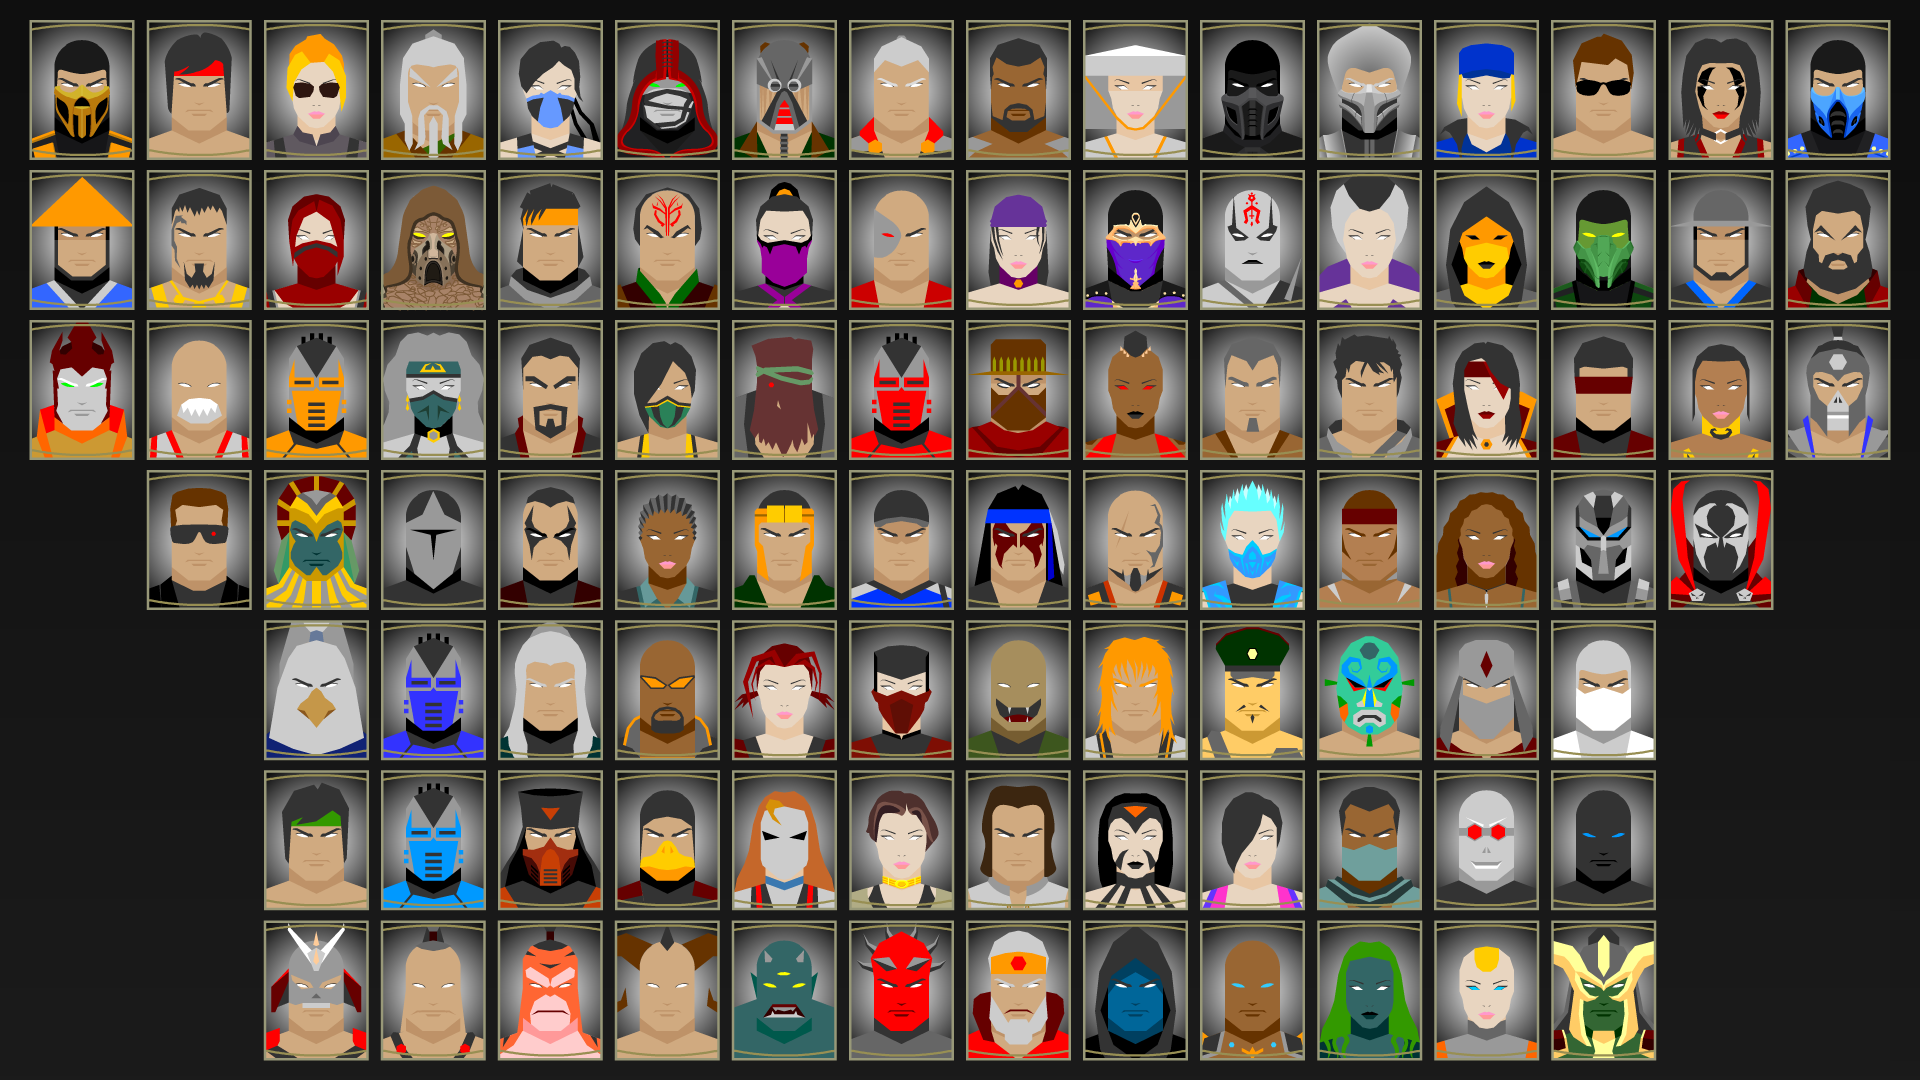 all mortal kombat characters names and pictures